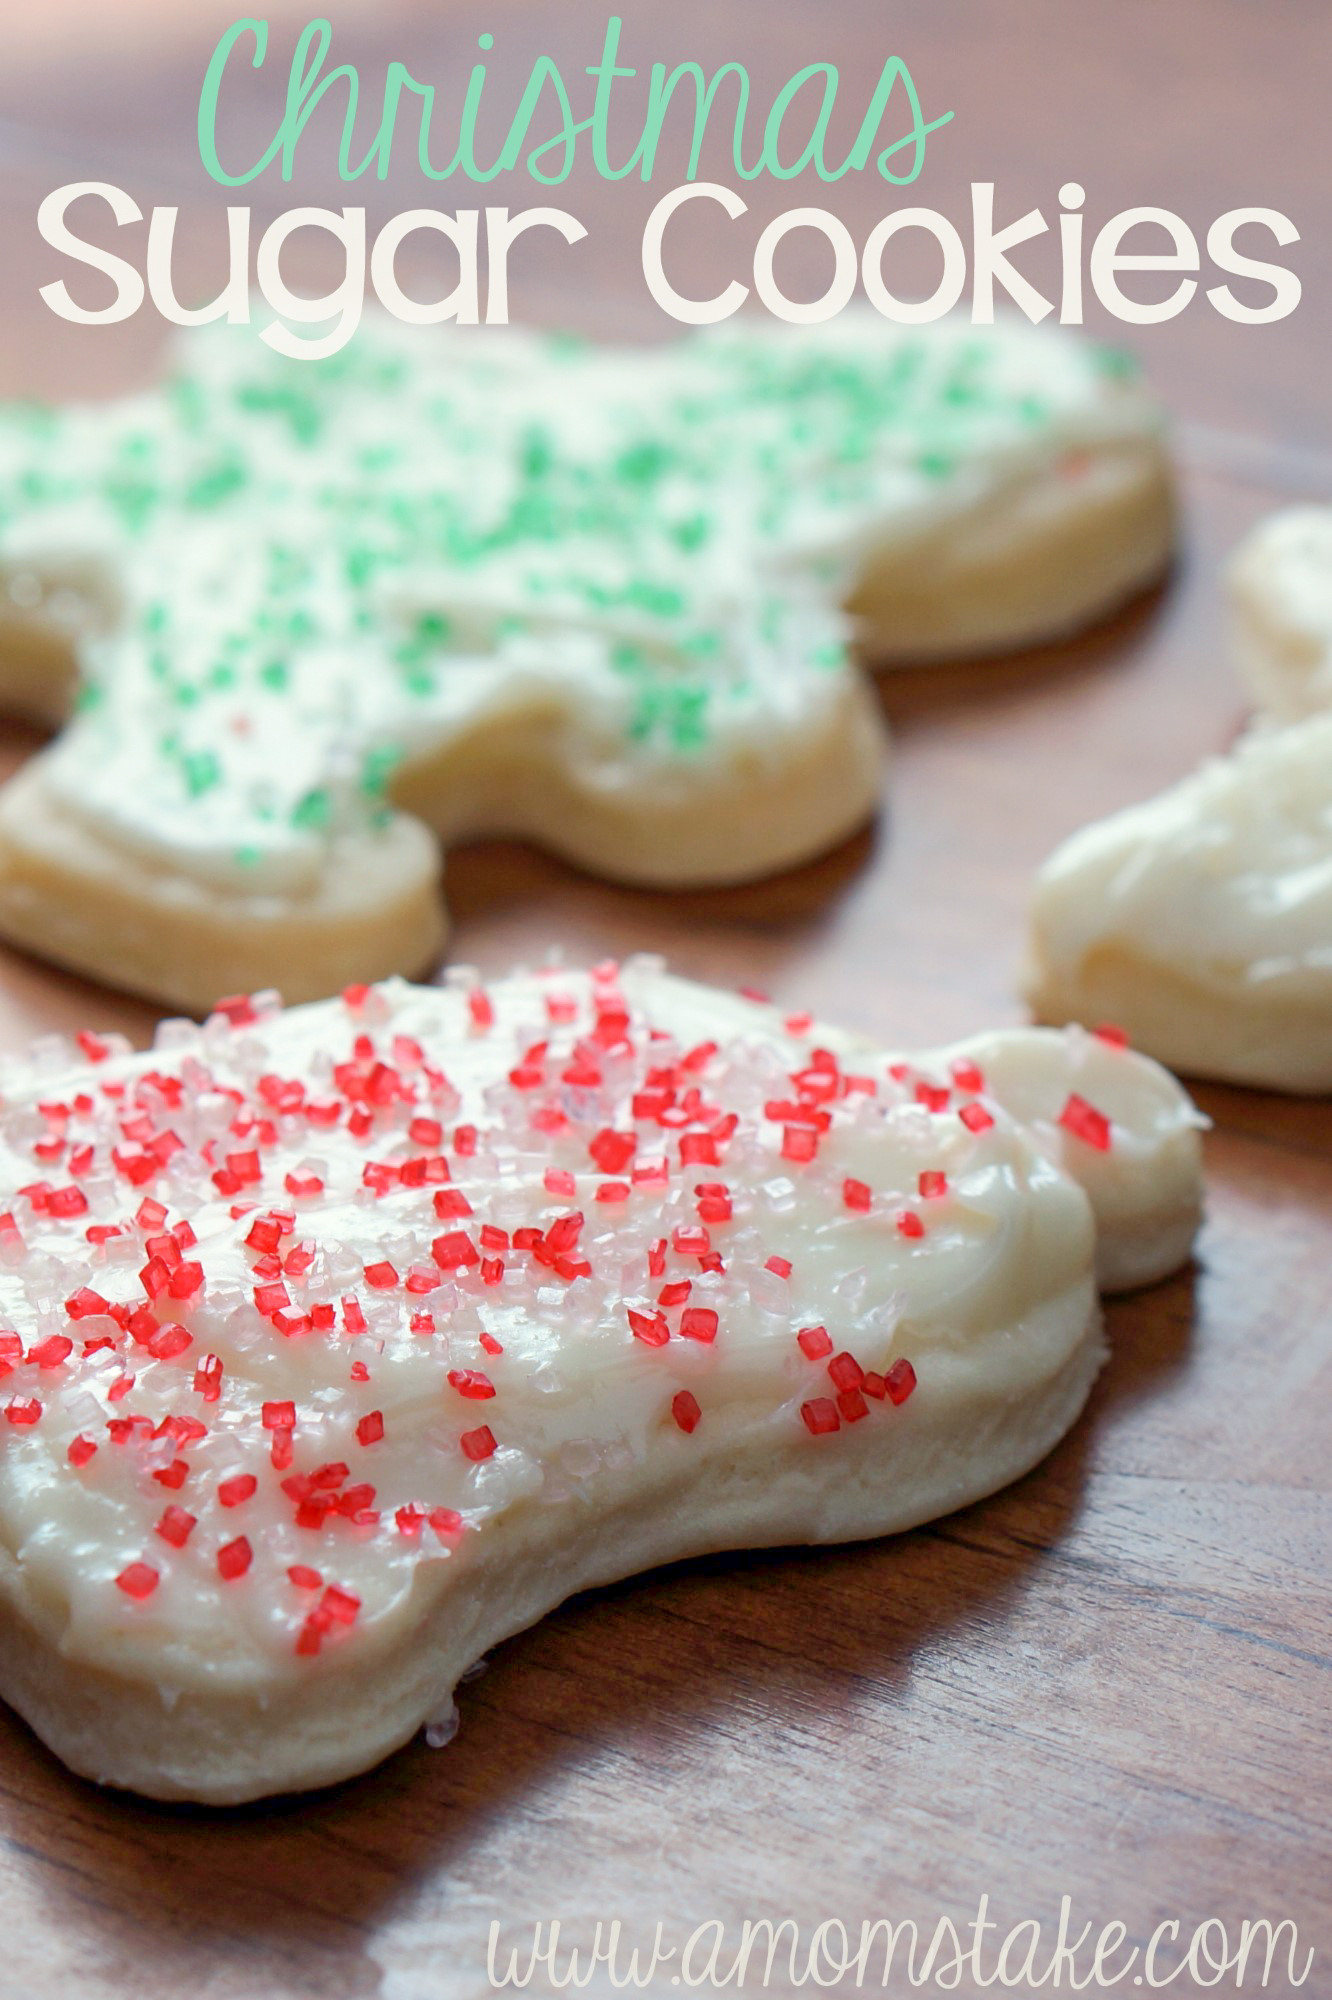 Christmas Cookies Sugar Cookies
 10 Christmas Cookies Recipes For The Holidays